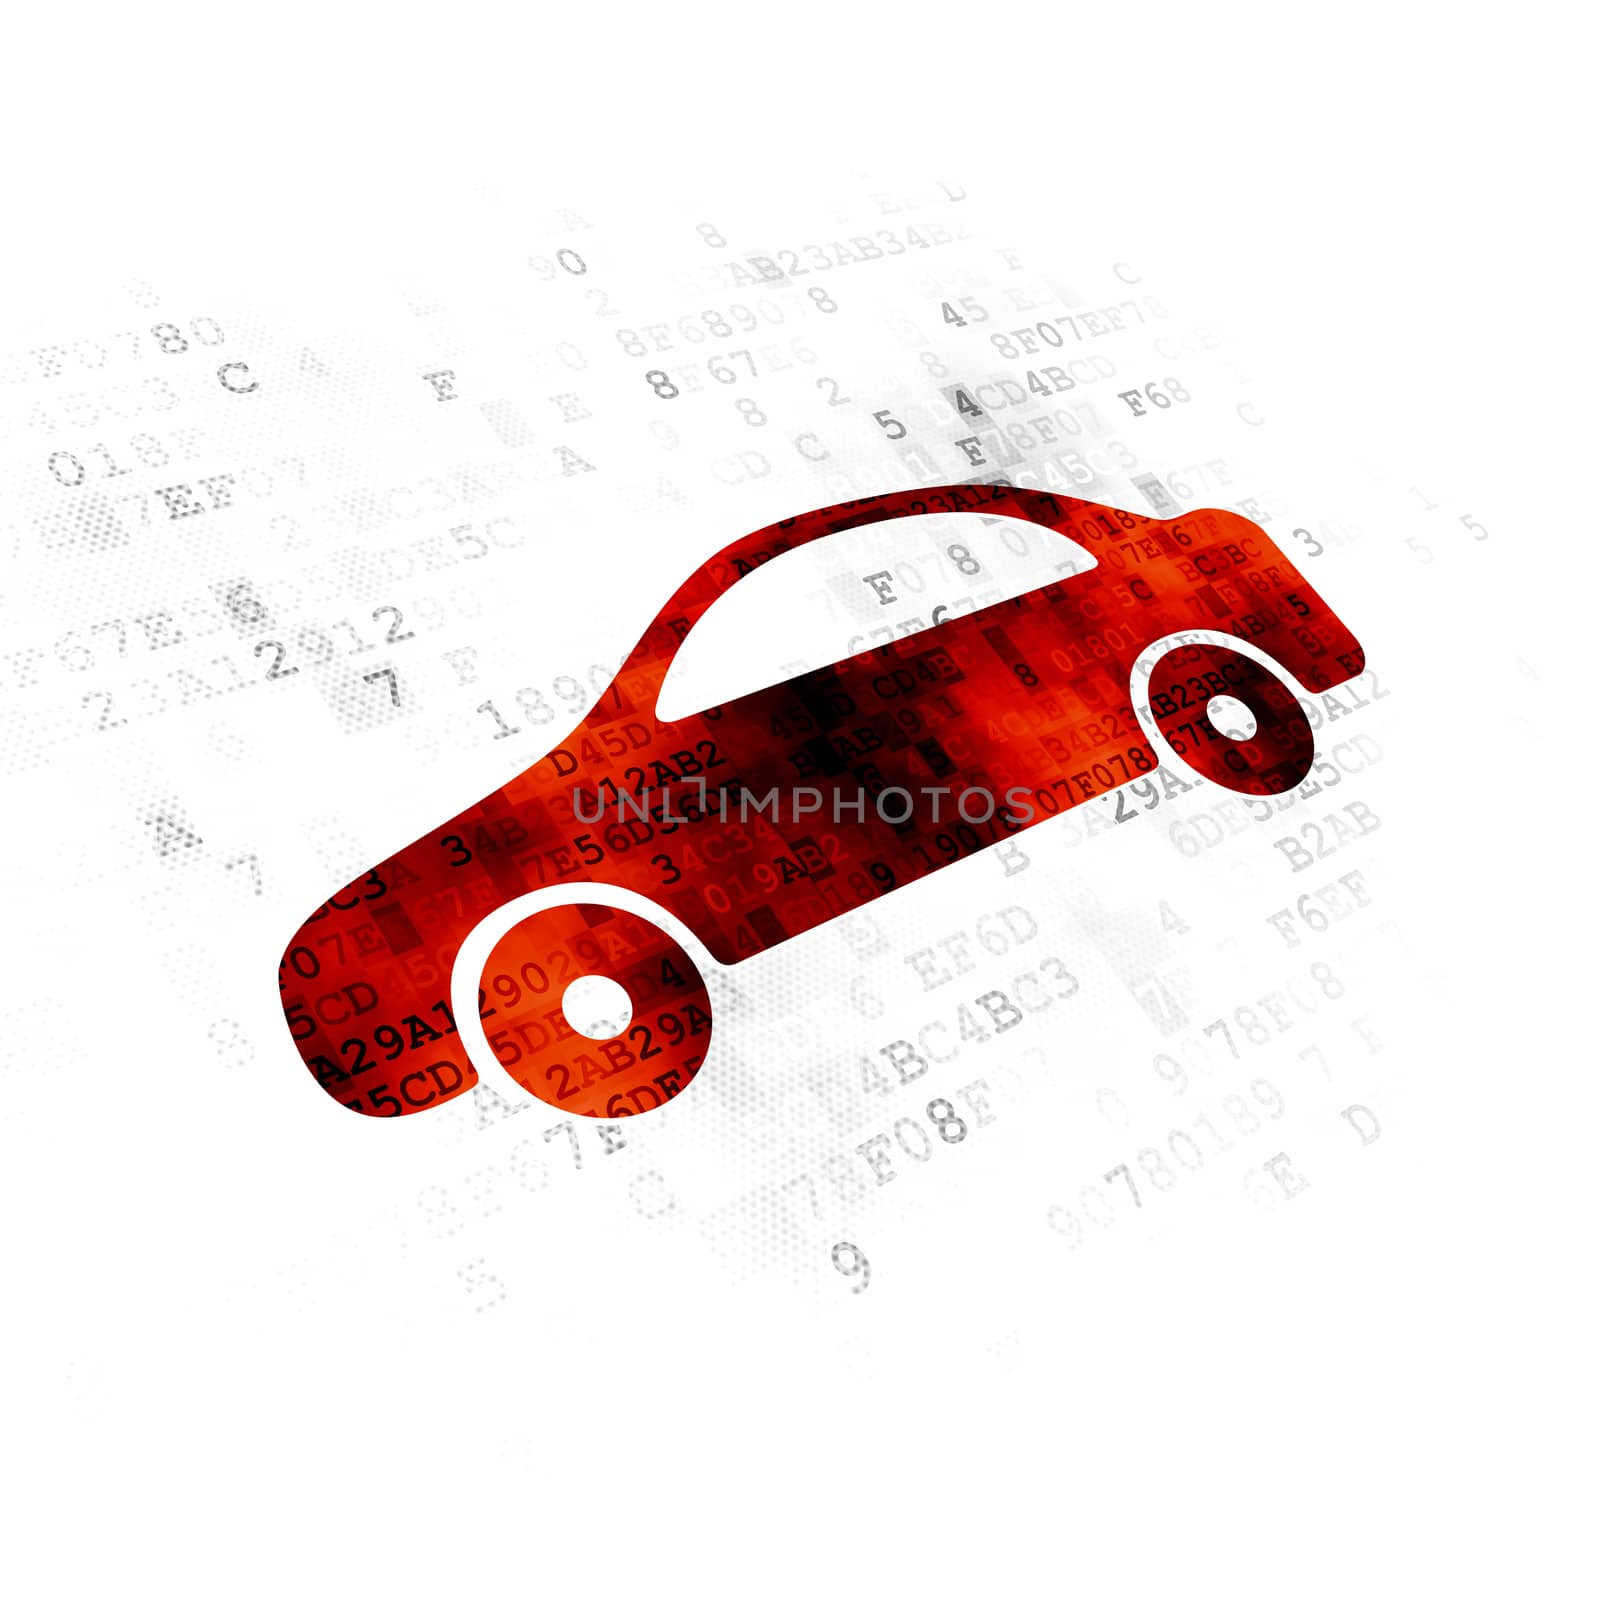 Travel concept: Pixelated red Car icon on Digital background